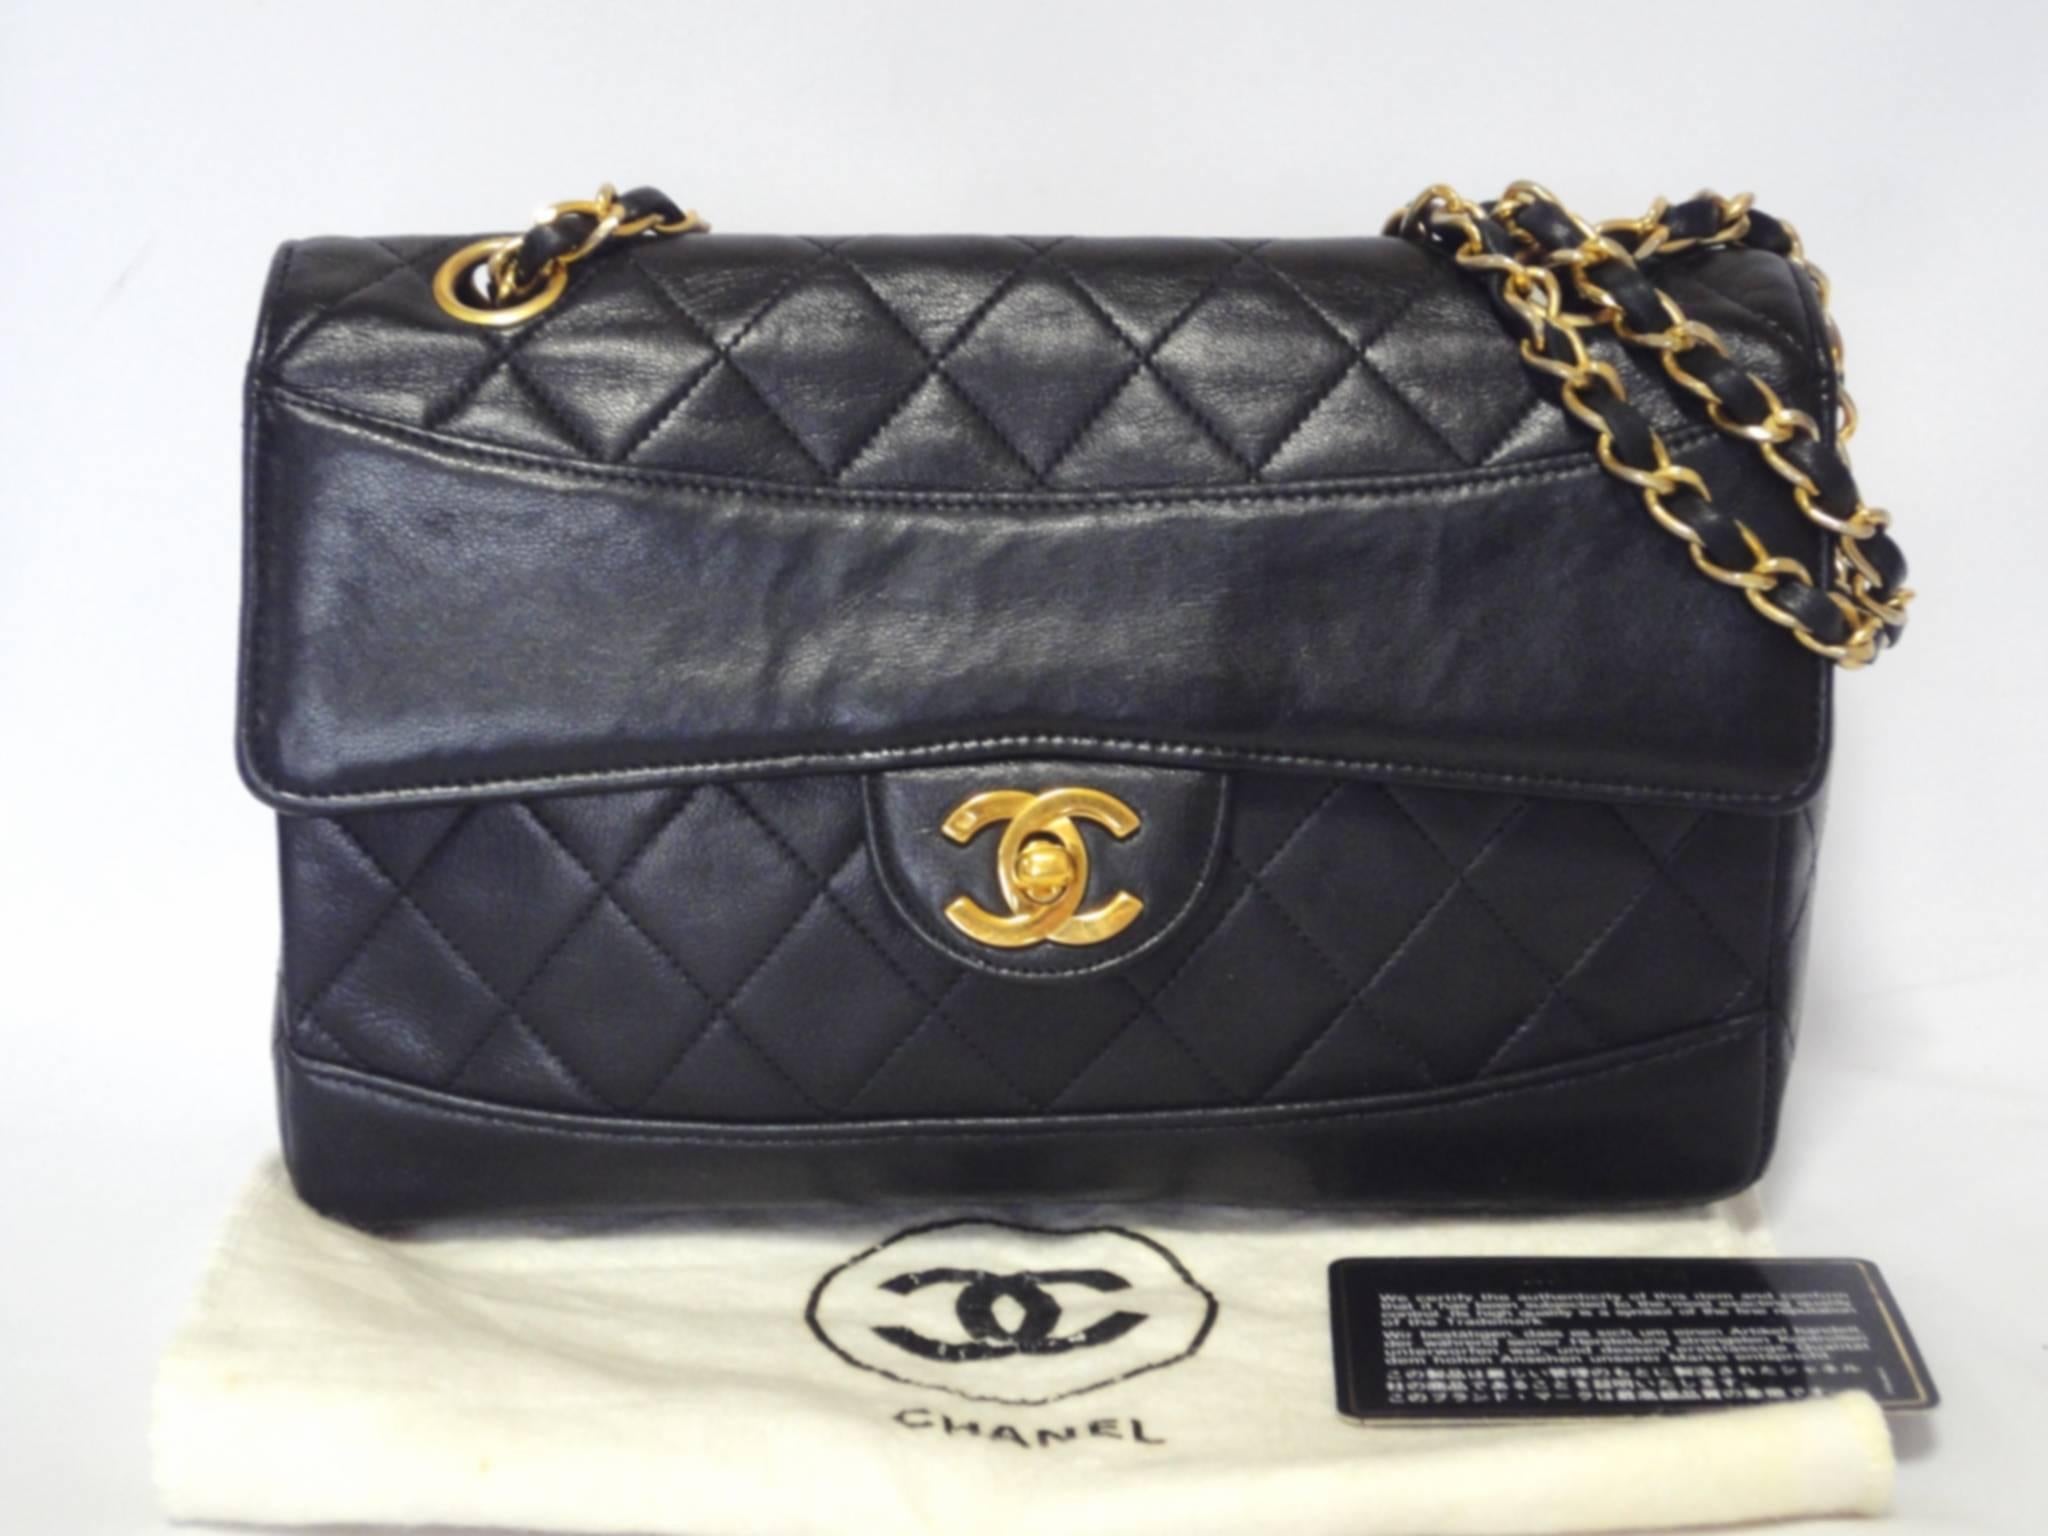 Vintage Chanel classic 2.55 black lambskin shoulder bag with golden chain and unique oval round stitch flap.

If you are a vintage CHANEL lover/collector, then this is a must-have piece for your collection!

Introducing another rare vintage